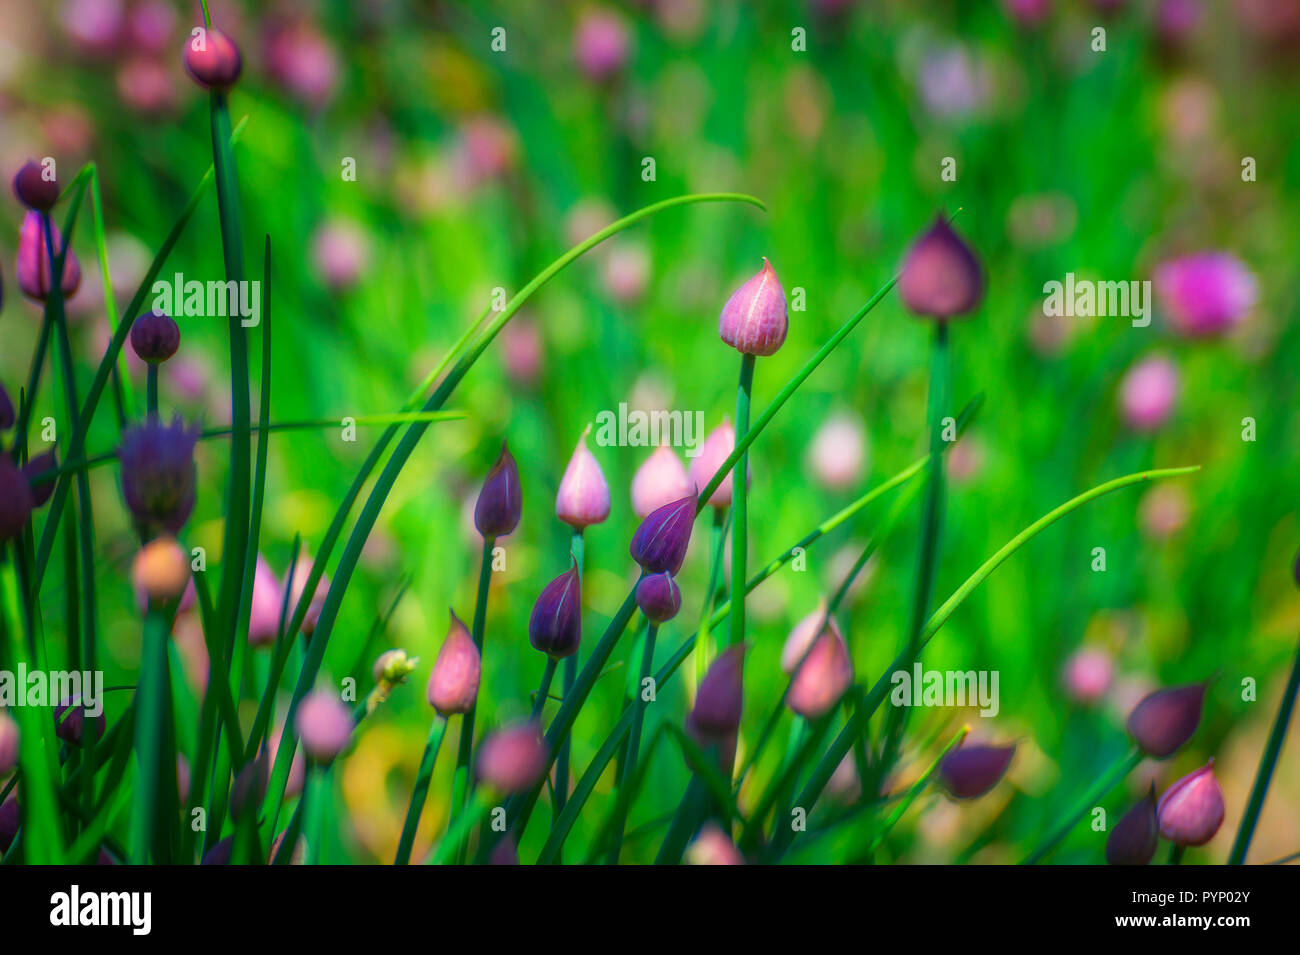 Delicate purple and pink chive buds on the ends of long green narrow stems in a spring herb garden. Stock Photo